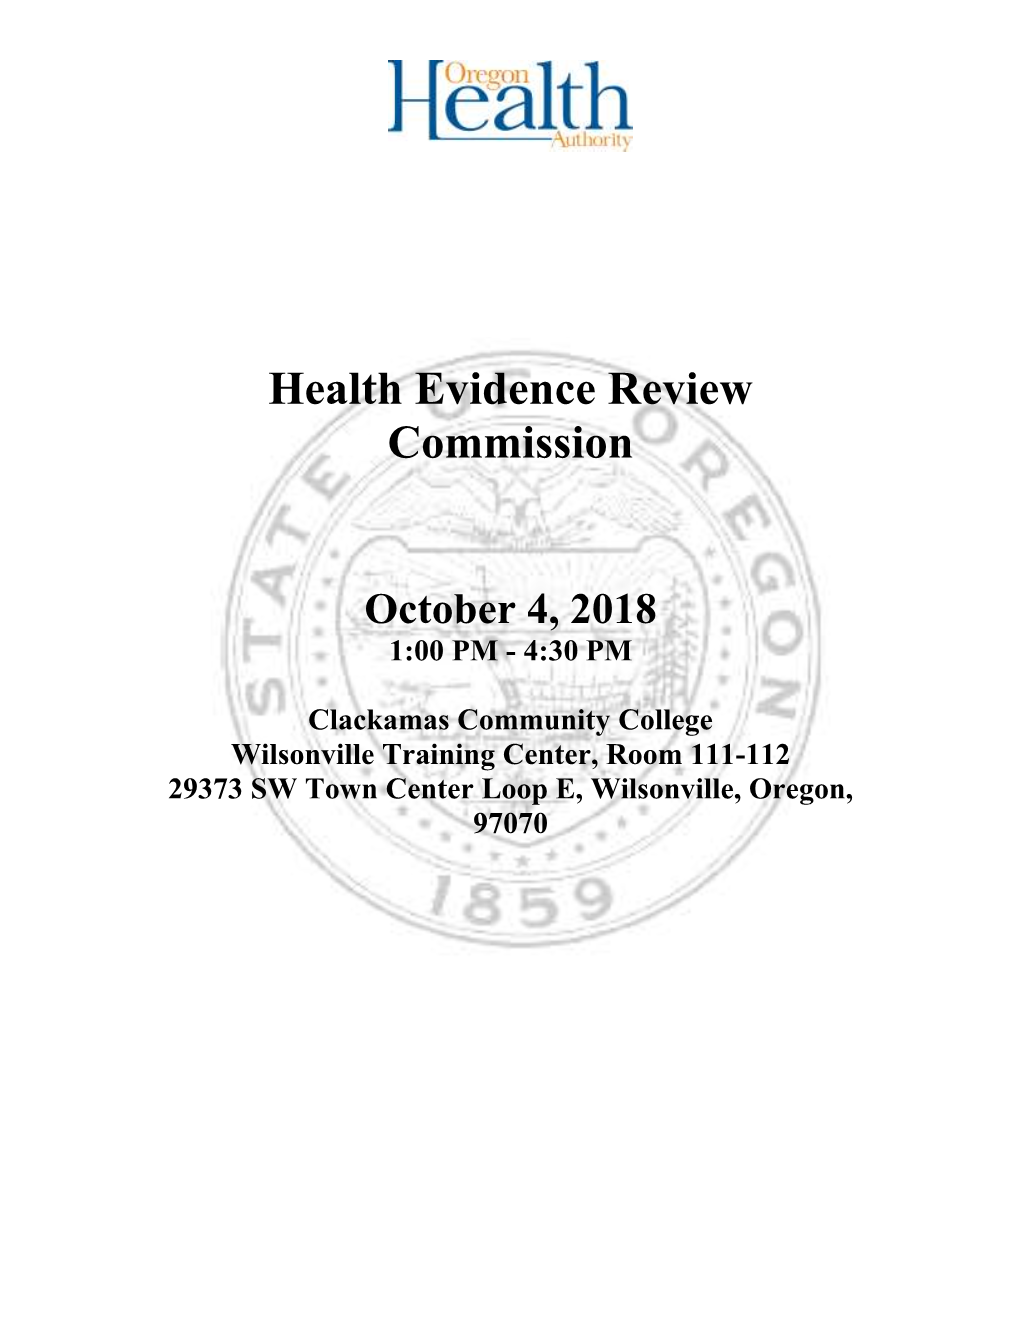 Health Evidence Review Commission